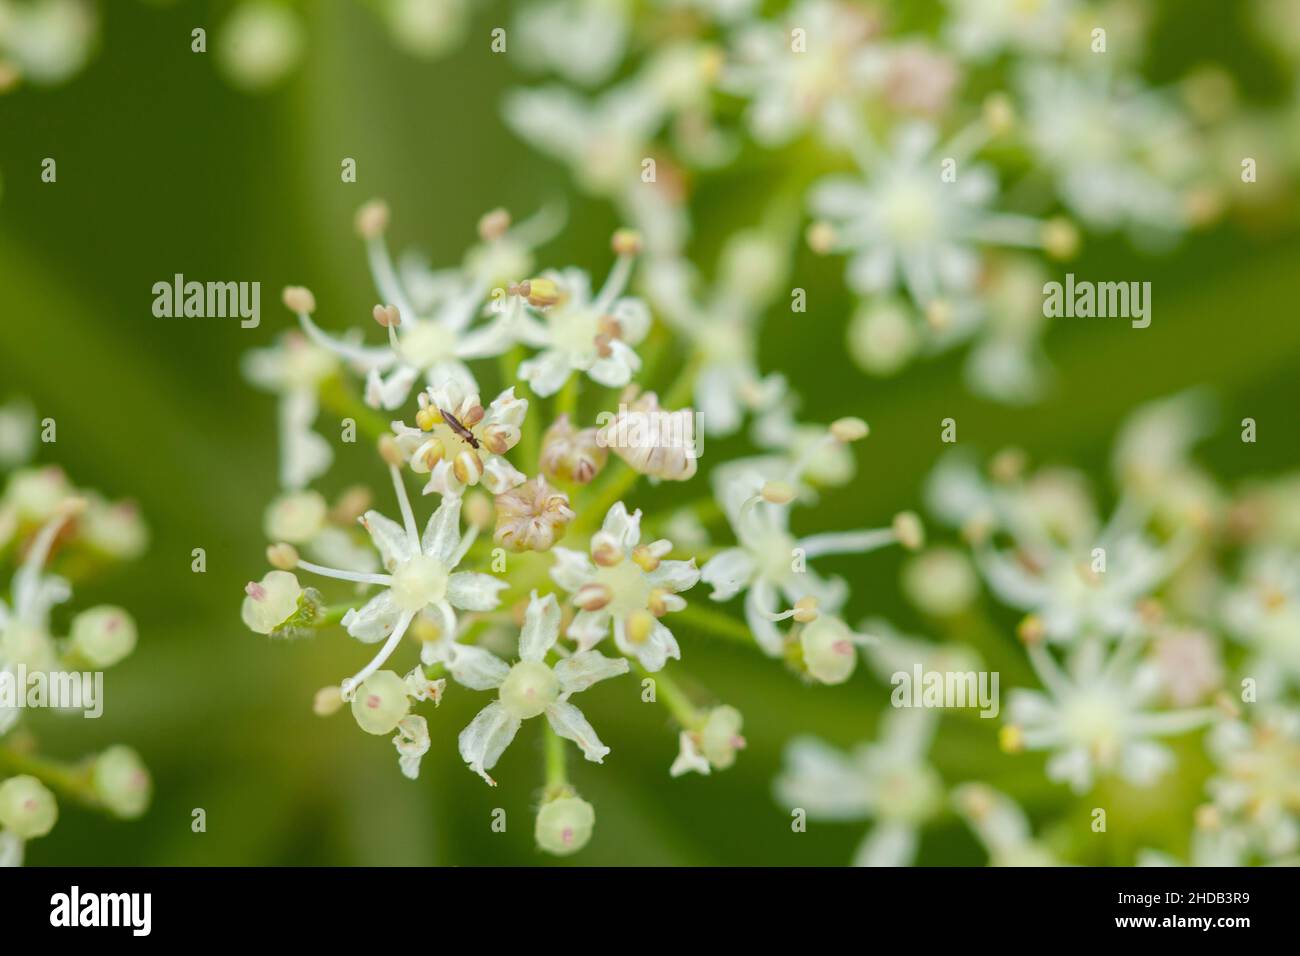 Cow parsley wildflower weed close up with natural green background Stock Photo